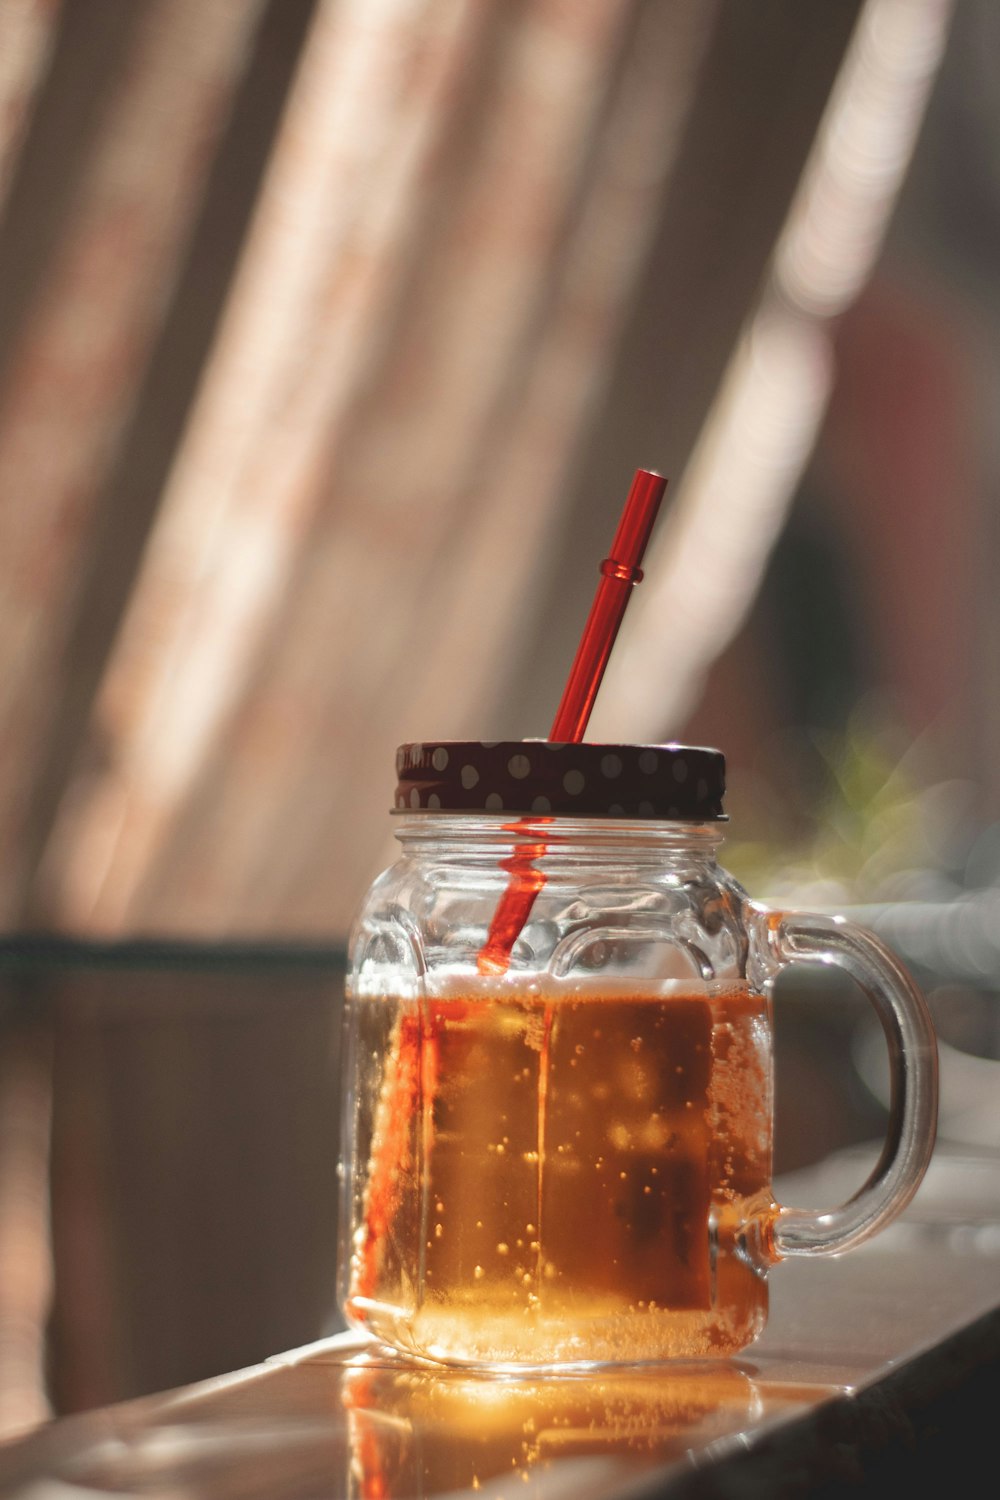 a glass mug filled with liquid and a straw